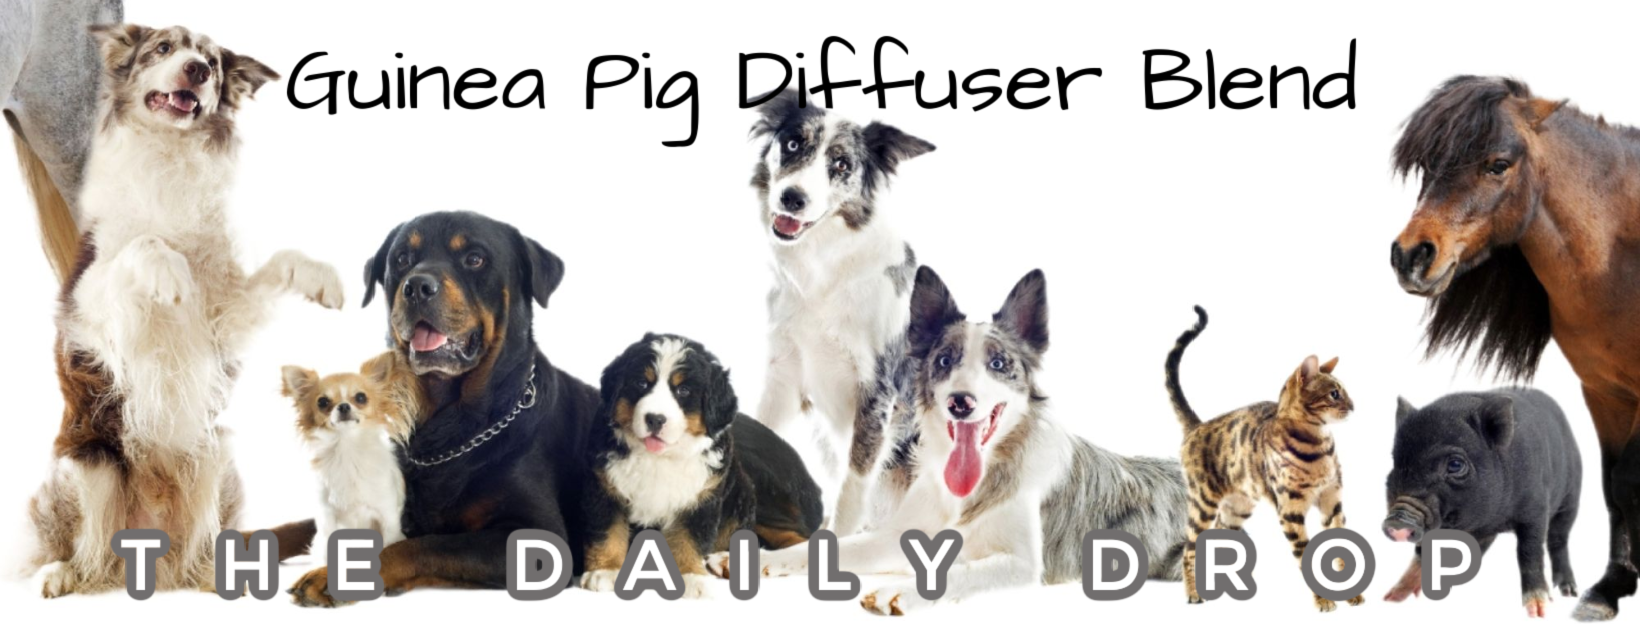 Guinea Pig Diffuser Blend | From Sandy